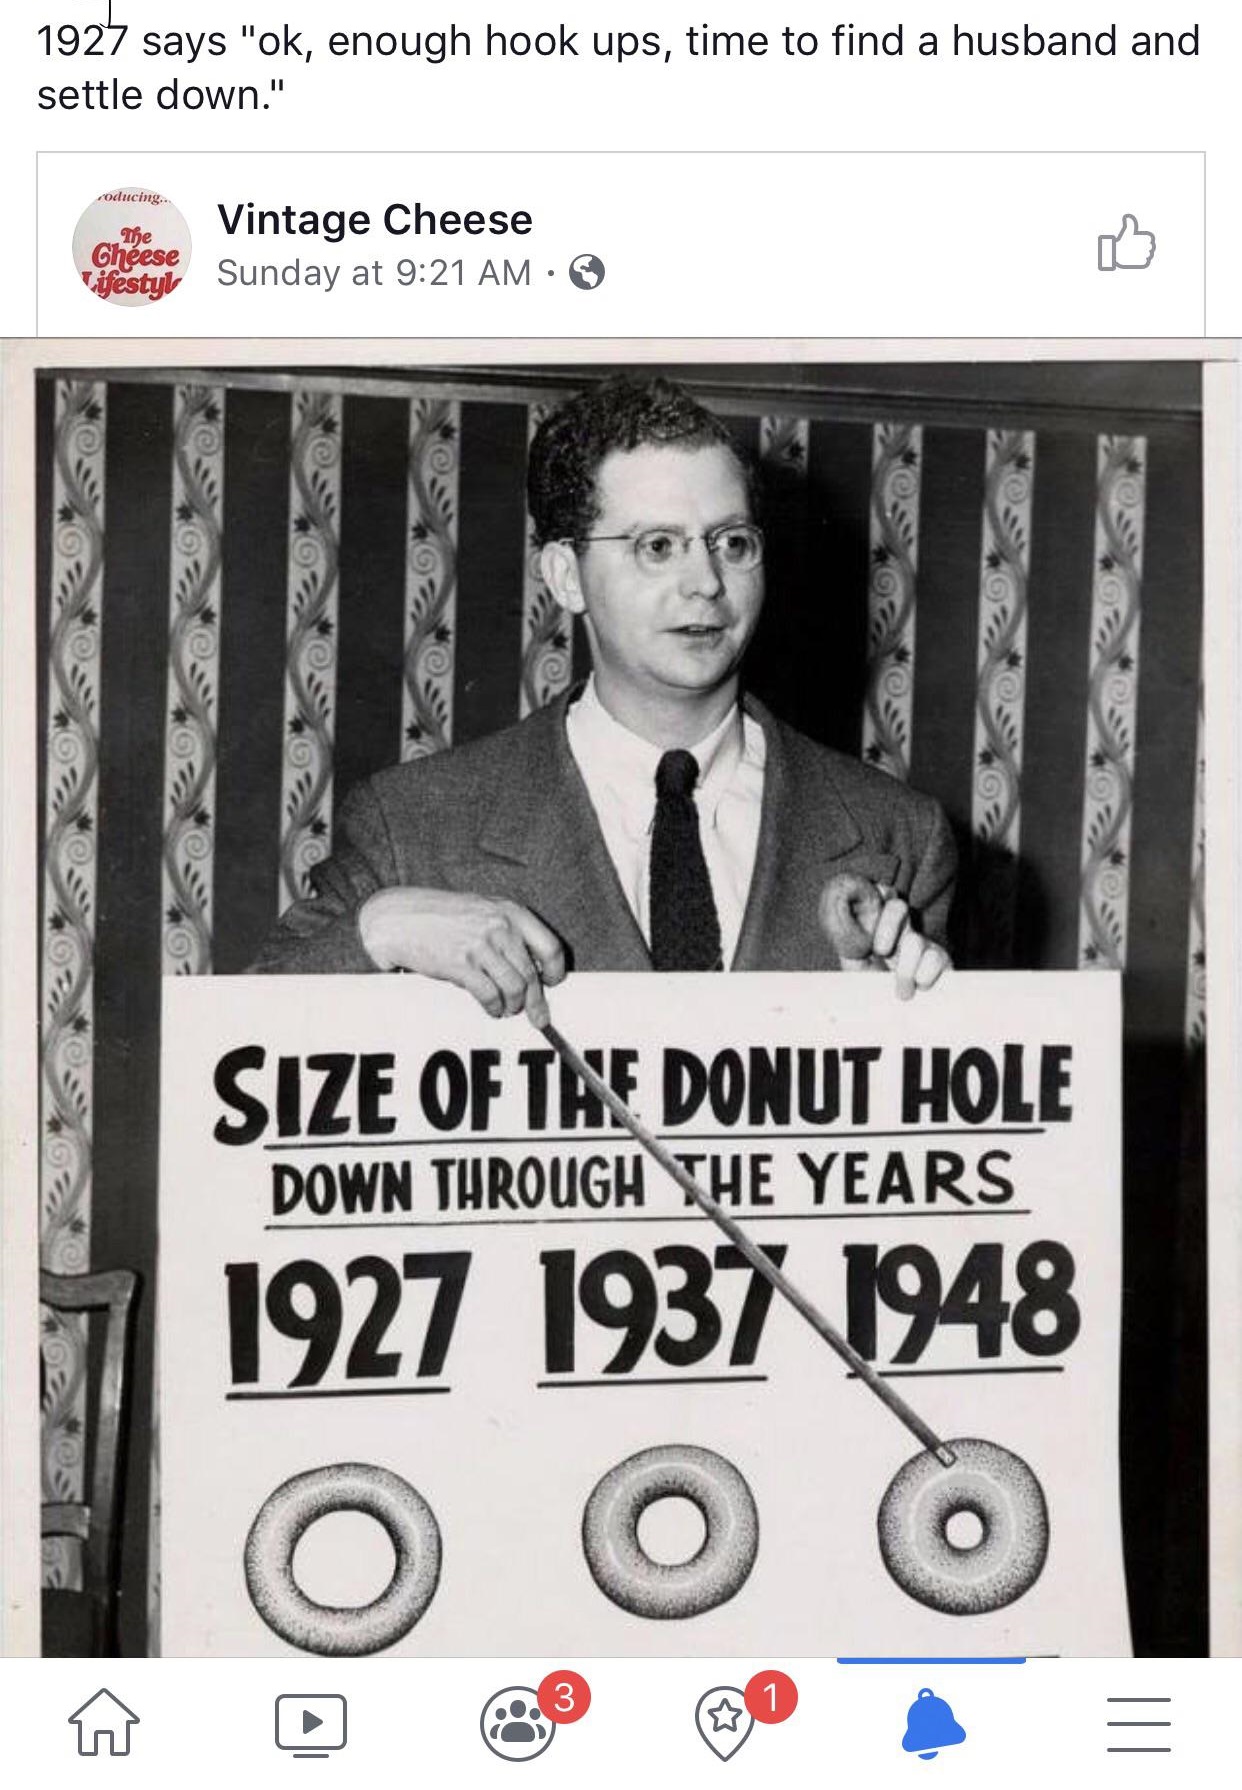 size of the donut hole through the years - 1927 says "ok, enough hook ups, time to find a husband and settle down." Vintage Cheese Say Sunday at Size Of The Donut Hole Down Through The Years 1927 1937 1948